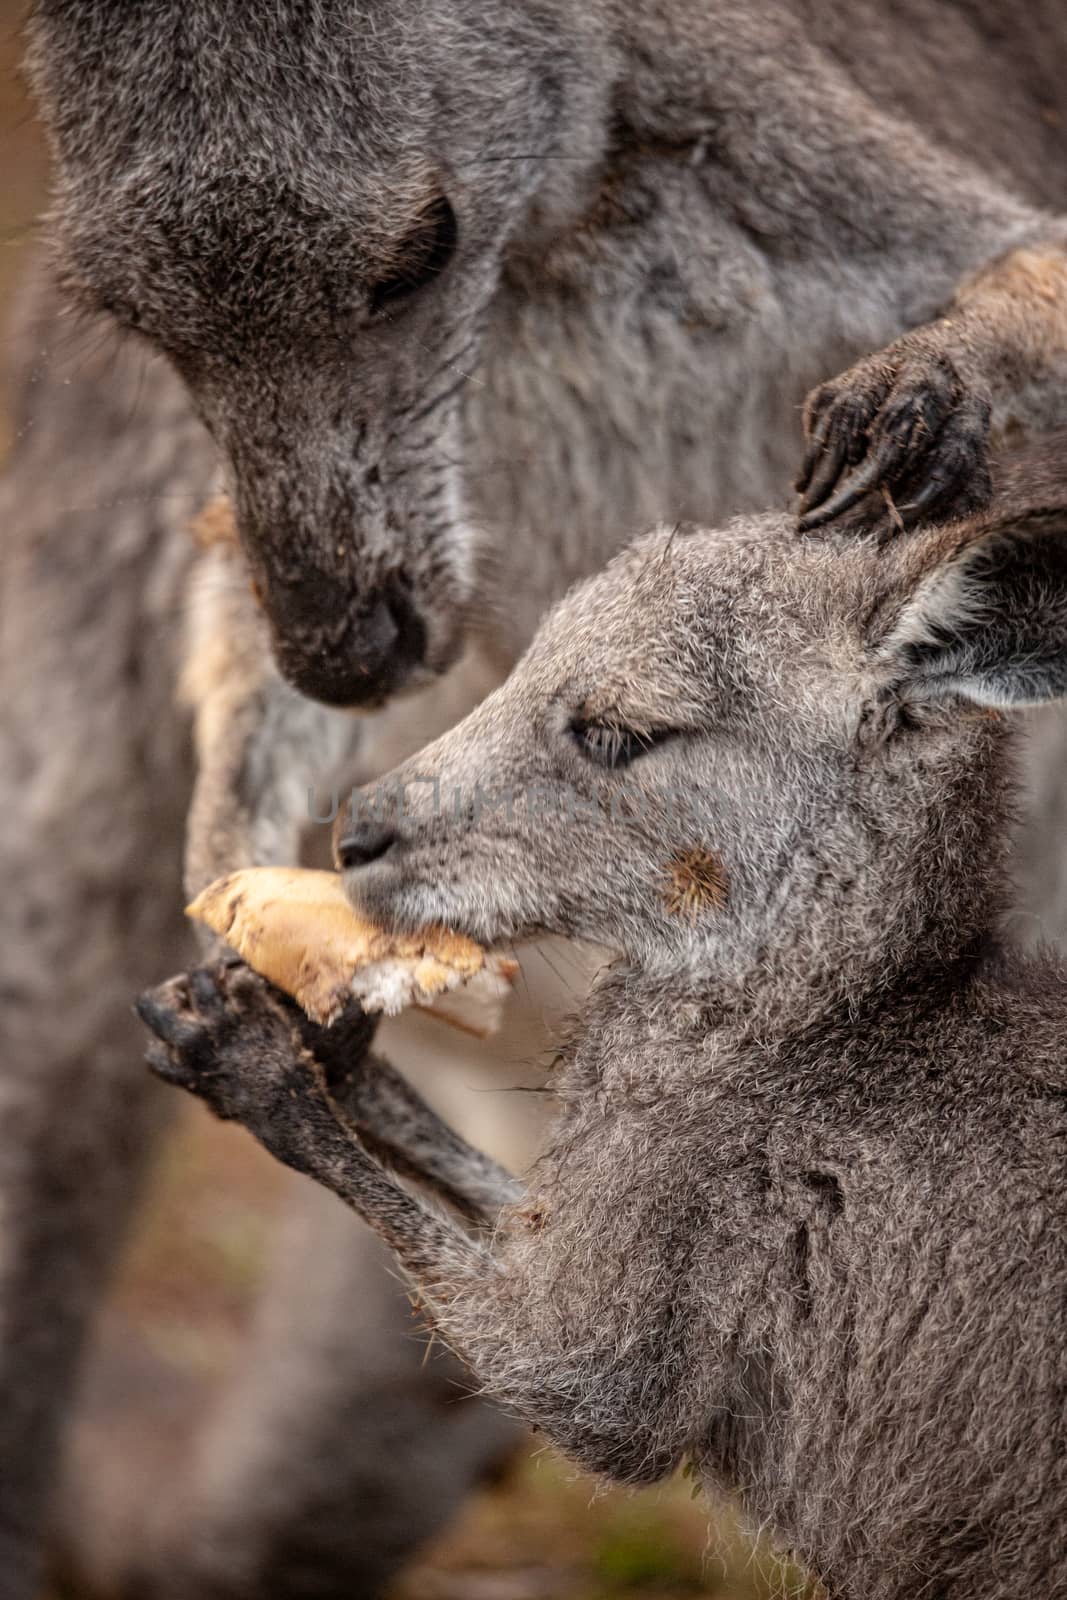 Mother kangaroo sharing food with her joey.  Animal behaviour, caring, sharing, loving, Focus to side of joey and arm, with paws and mouth in motion